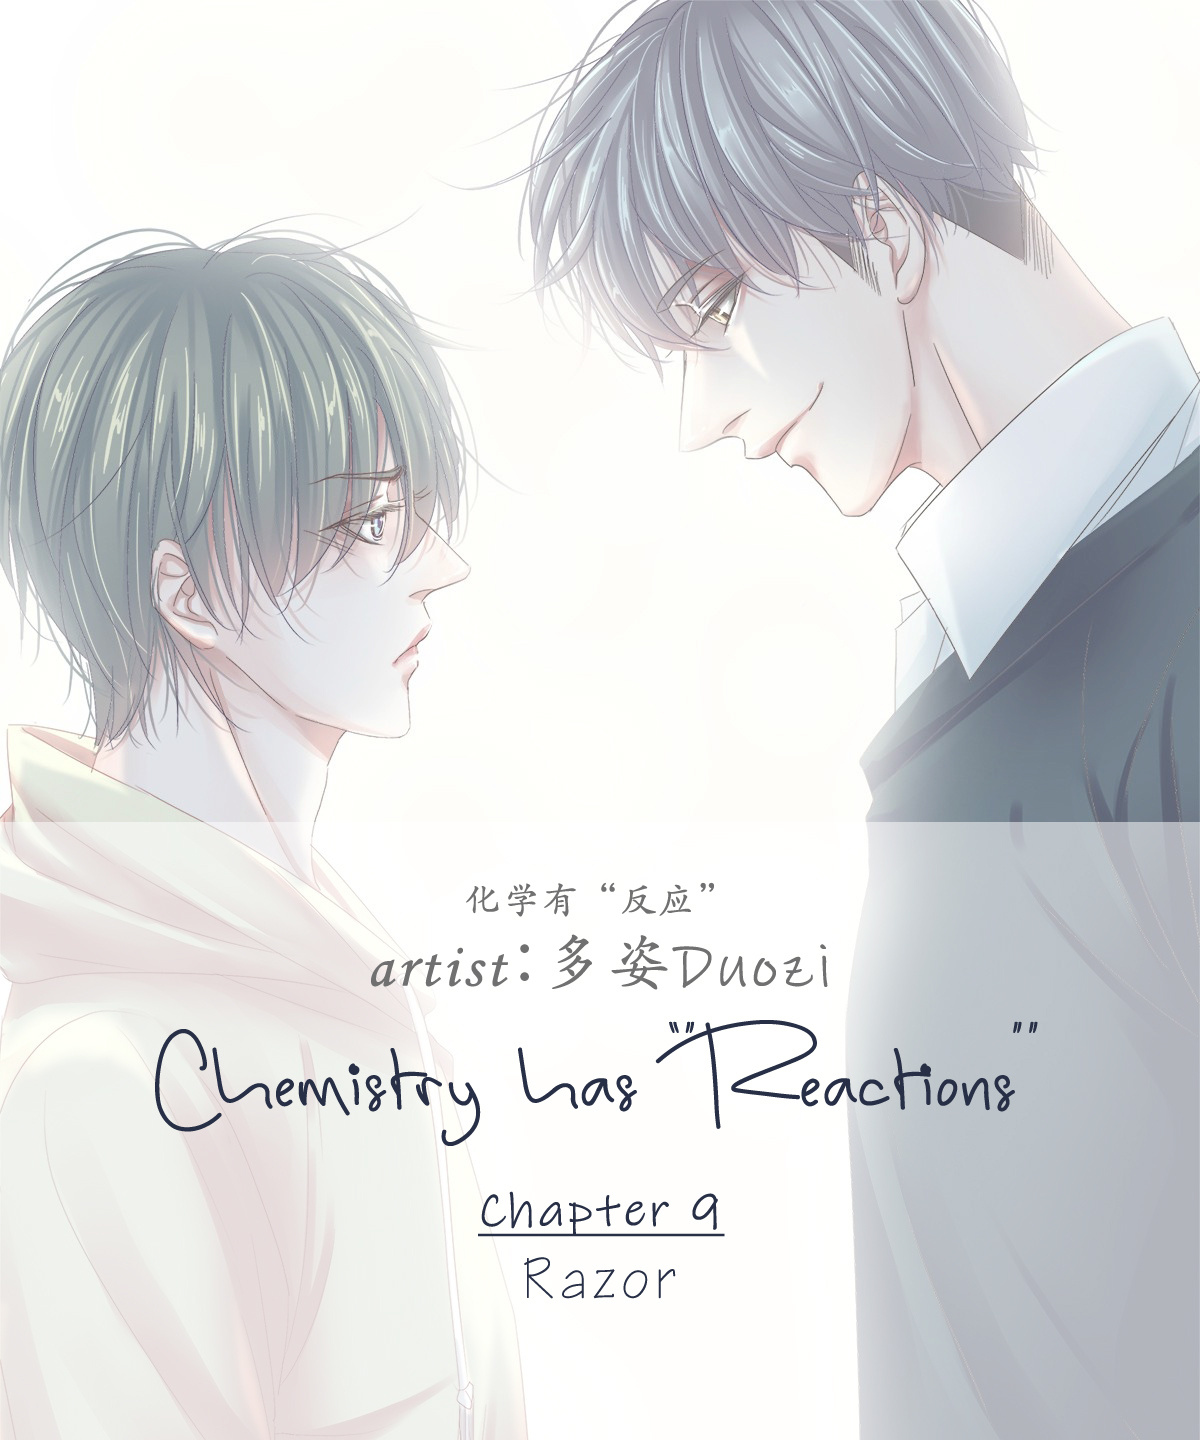 Chemistry Has "reactions" Chapter 9 #1